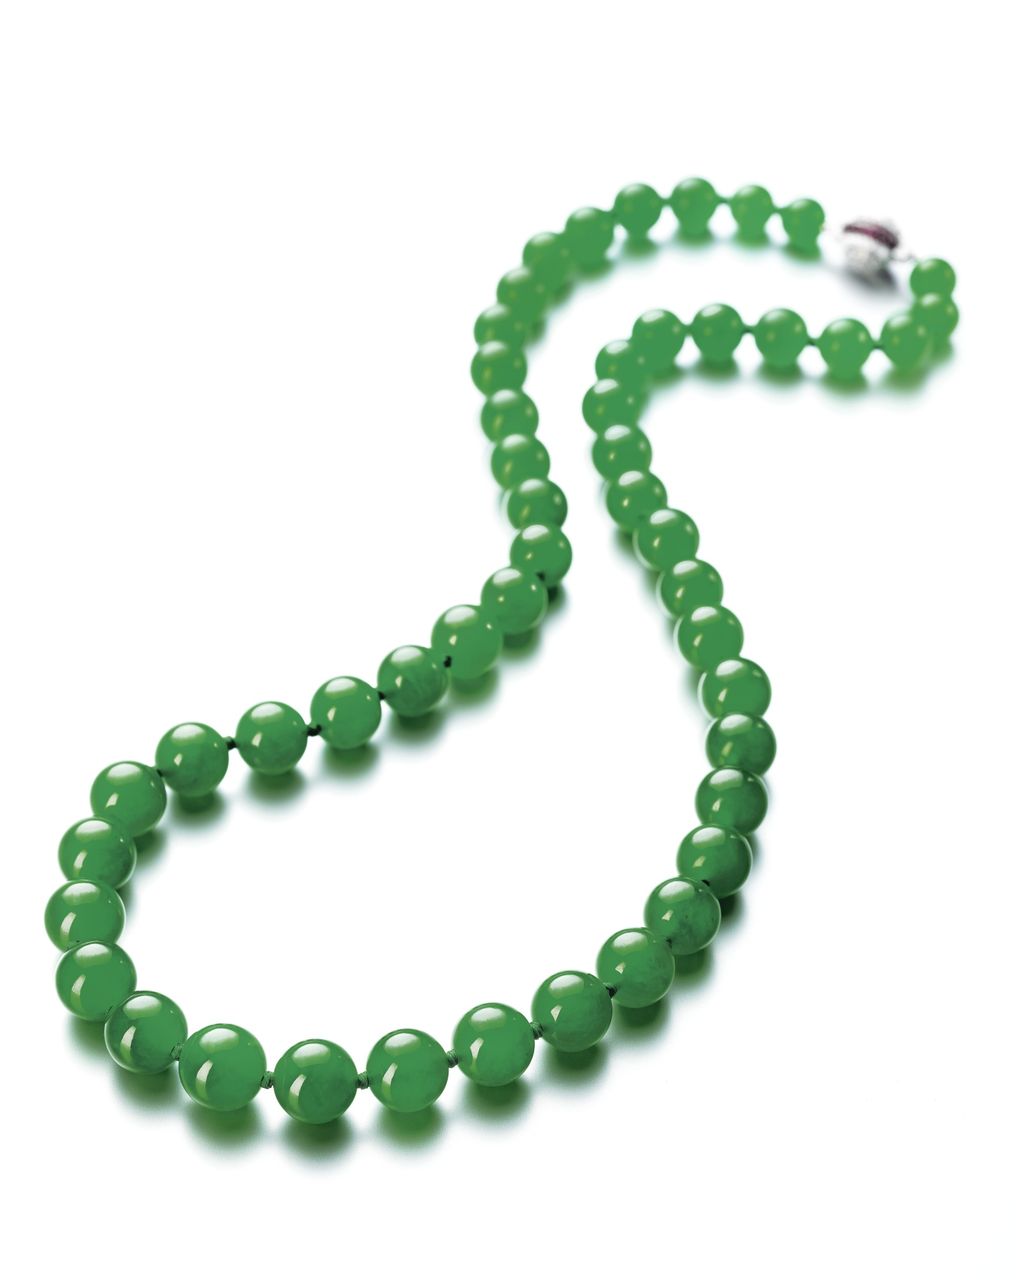 Lot 1700 - Another View of the Important Jadeite Bead, Diamond and Ruby Necklace